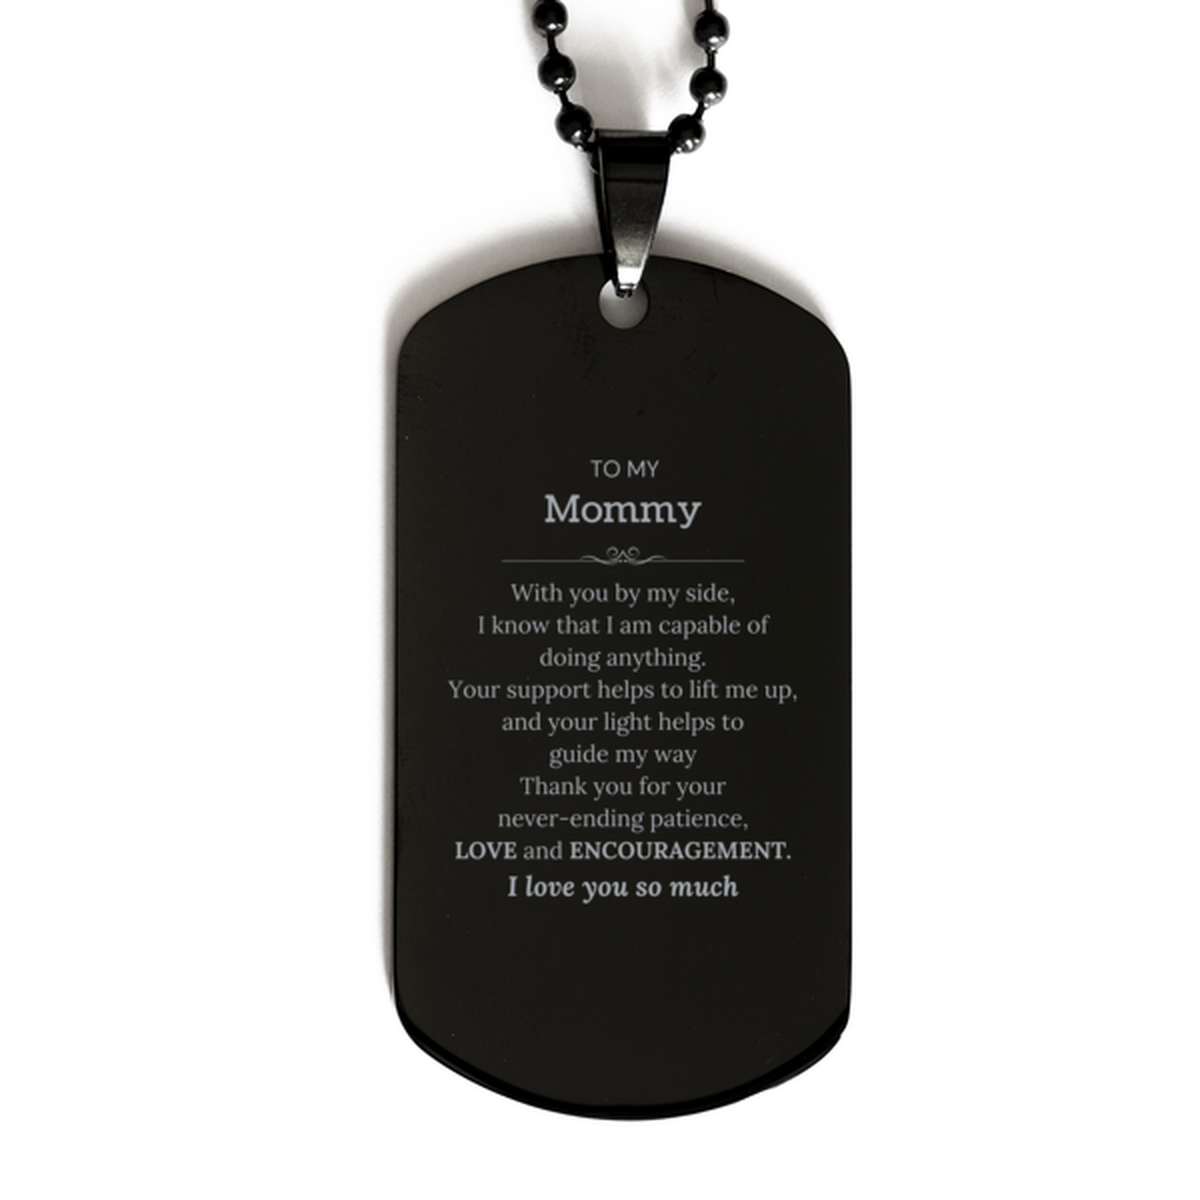 Appreciation Mommy Black Dog Tag Gifts, To My Mommy Birthday Christmas Wedding Keepsake Gifts for Mommy With you by my side, I know that I am capable of doing anything. I love you so much